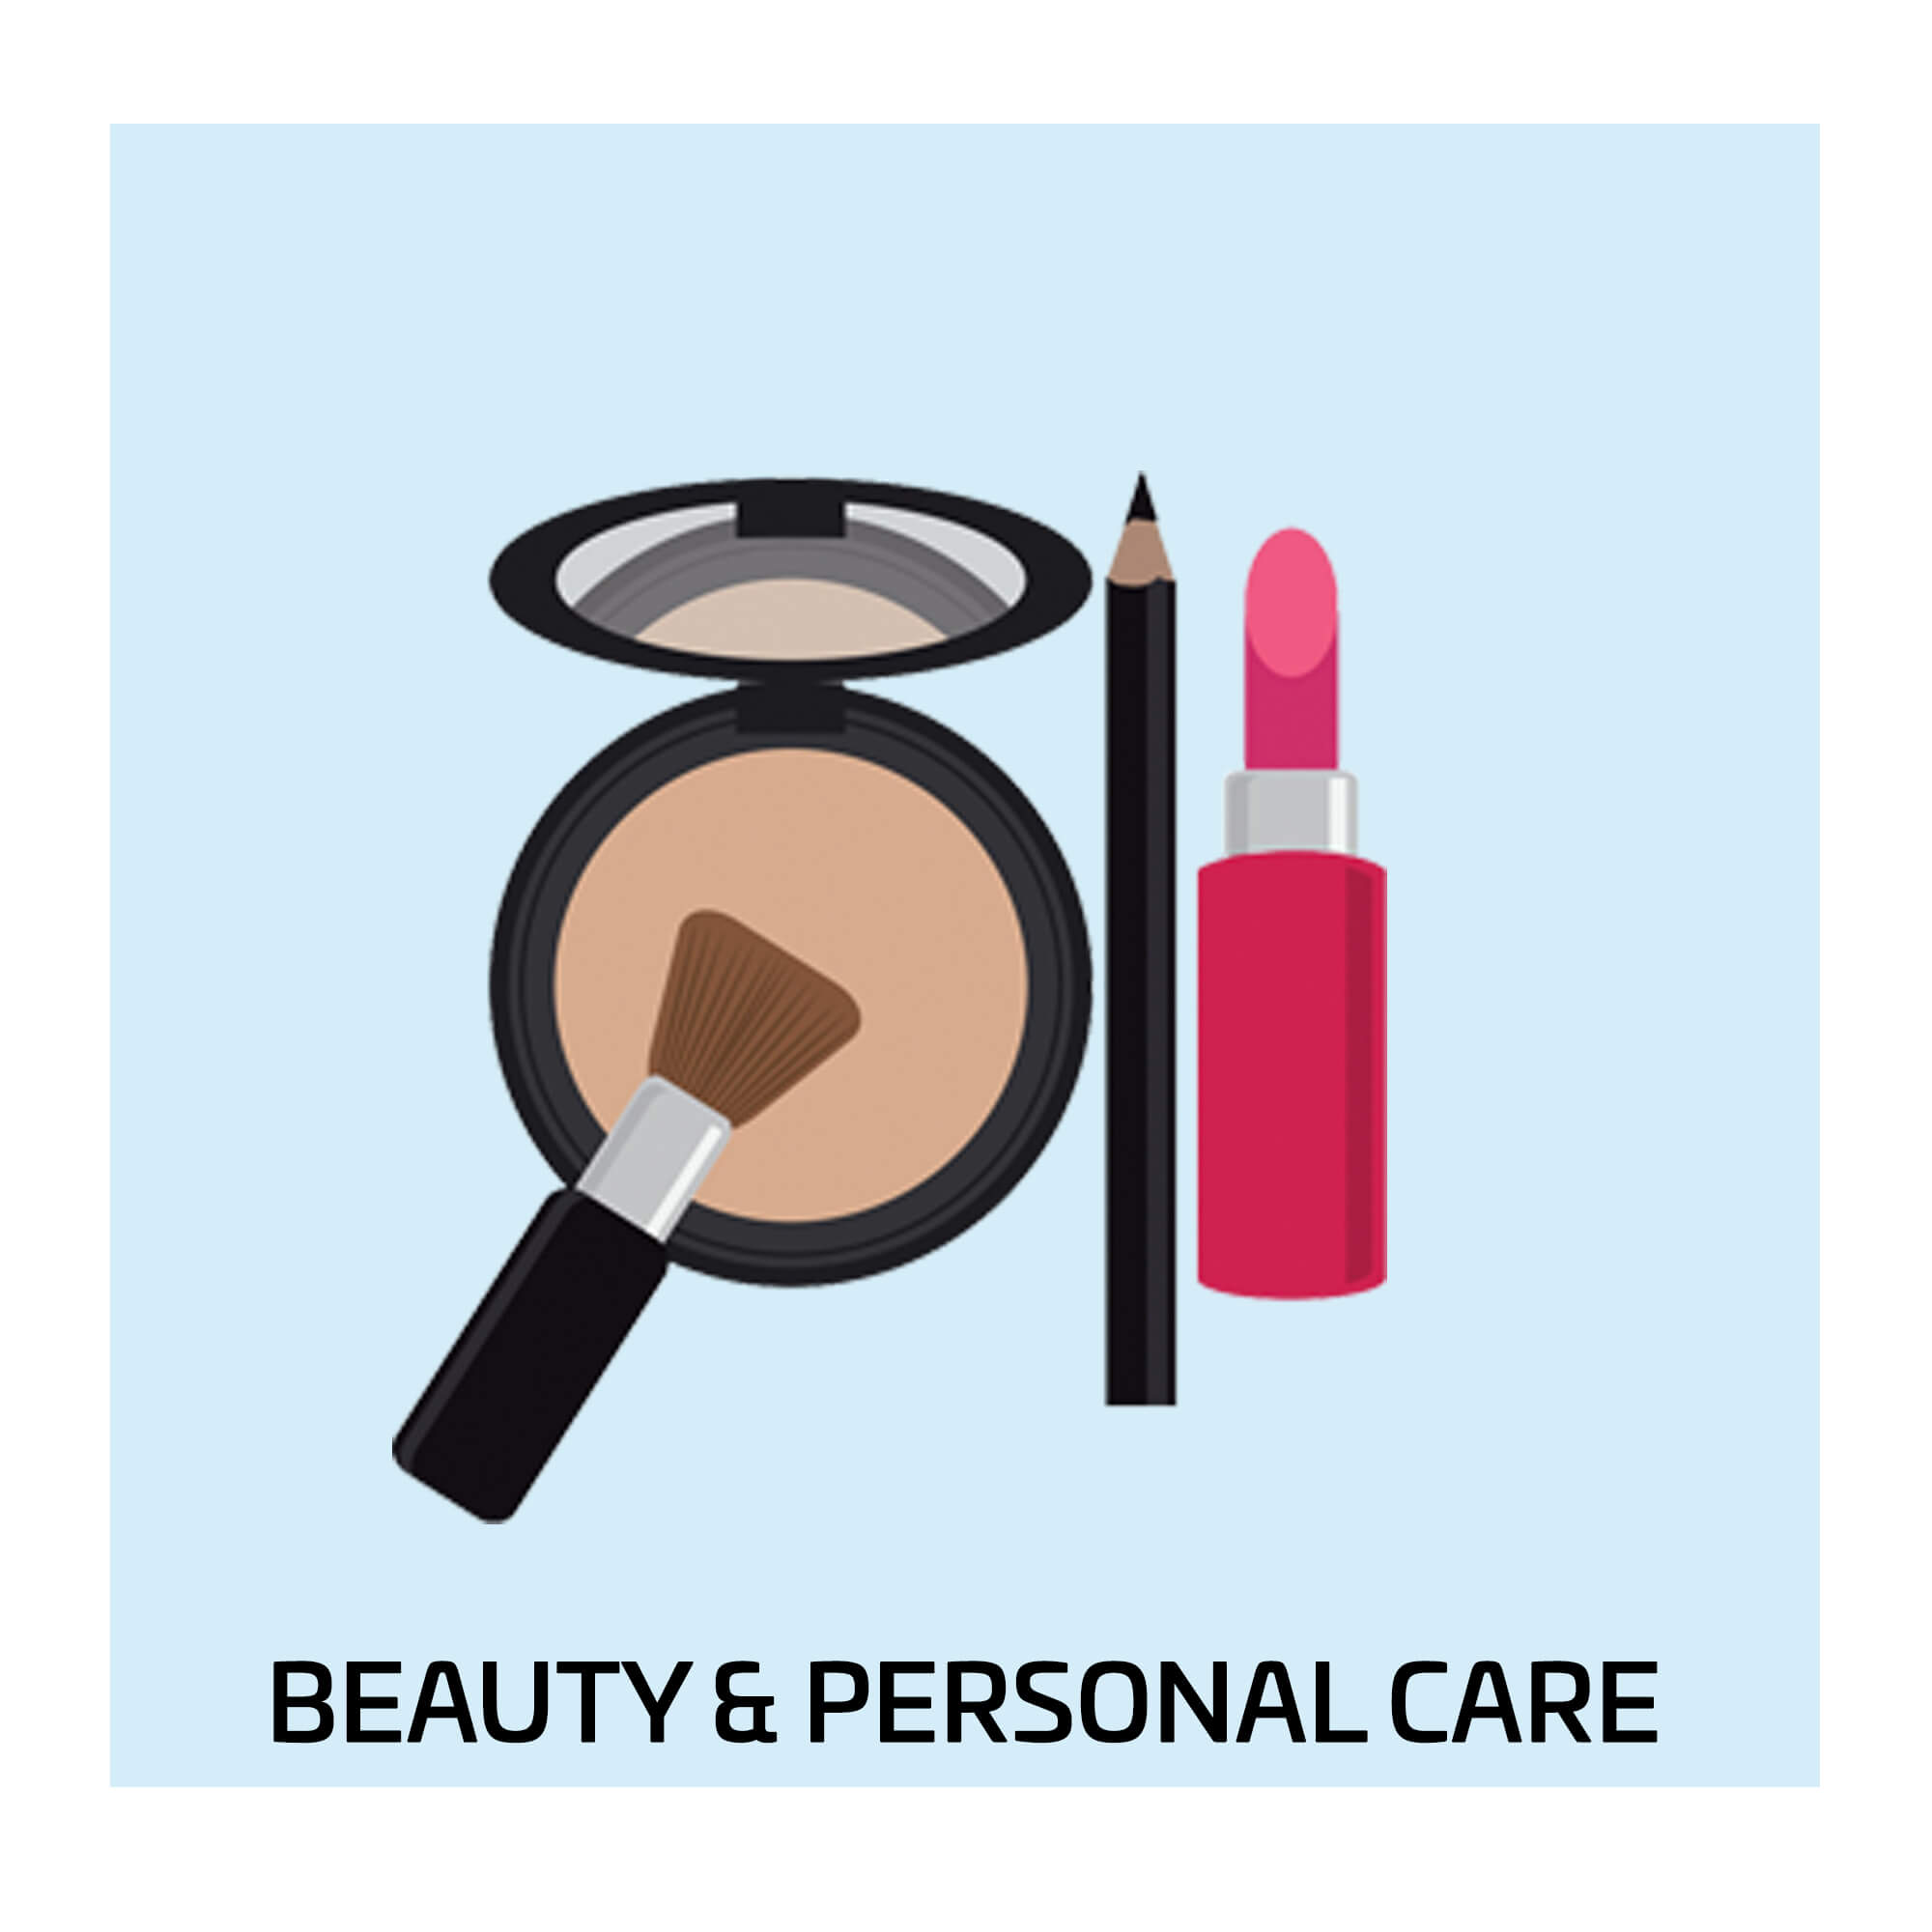 BEUTY & PERSONAL CARE